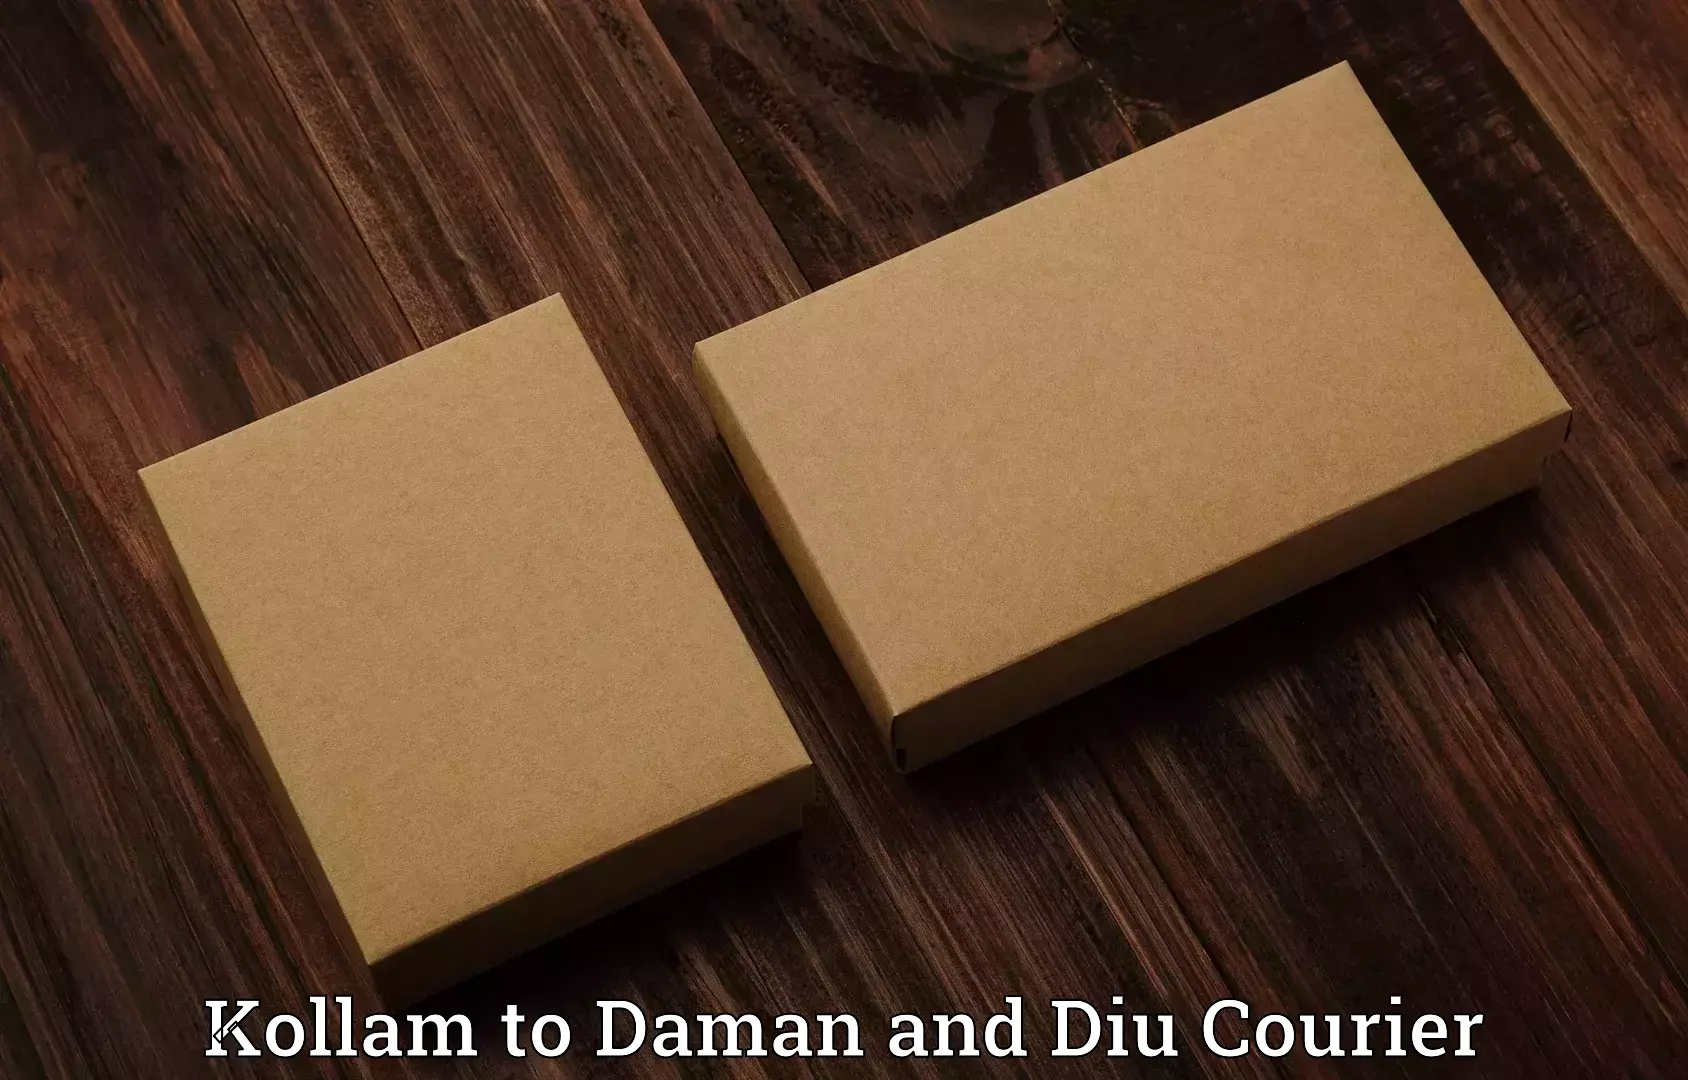 Luggage shipment specialists Kollam to Daman and Diu